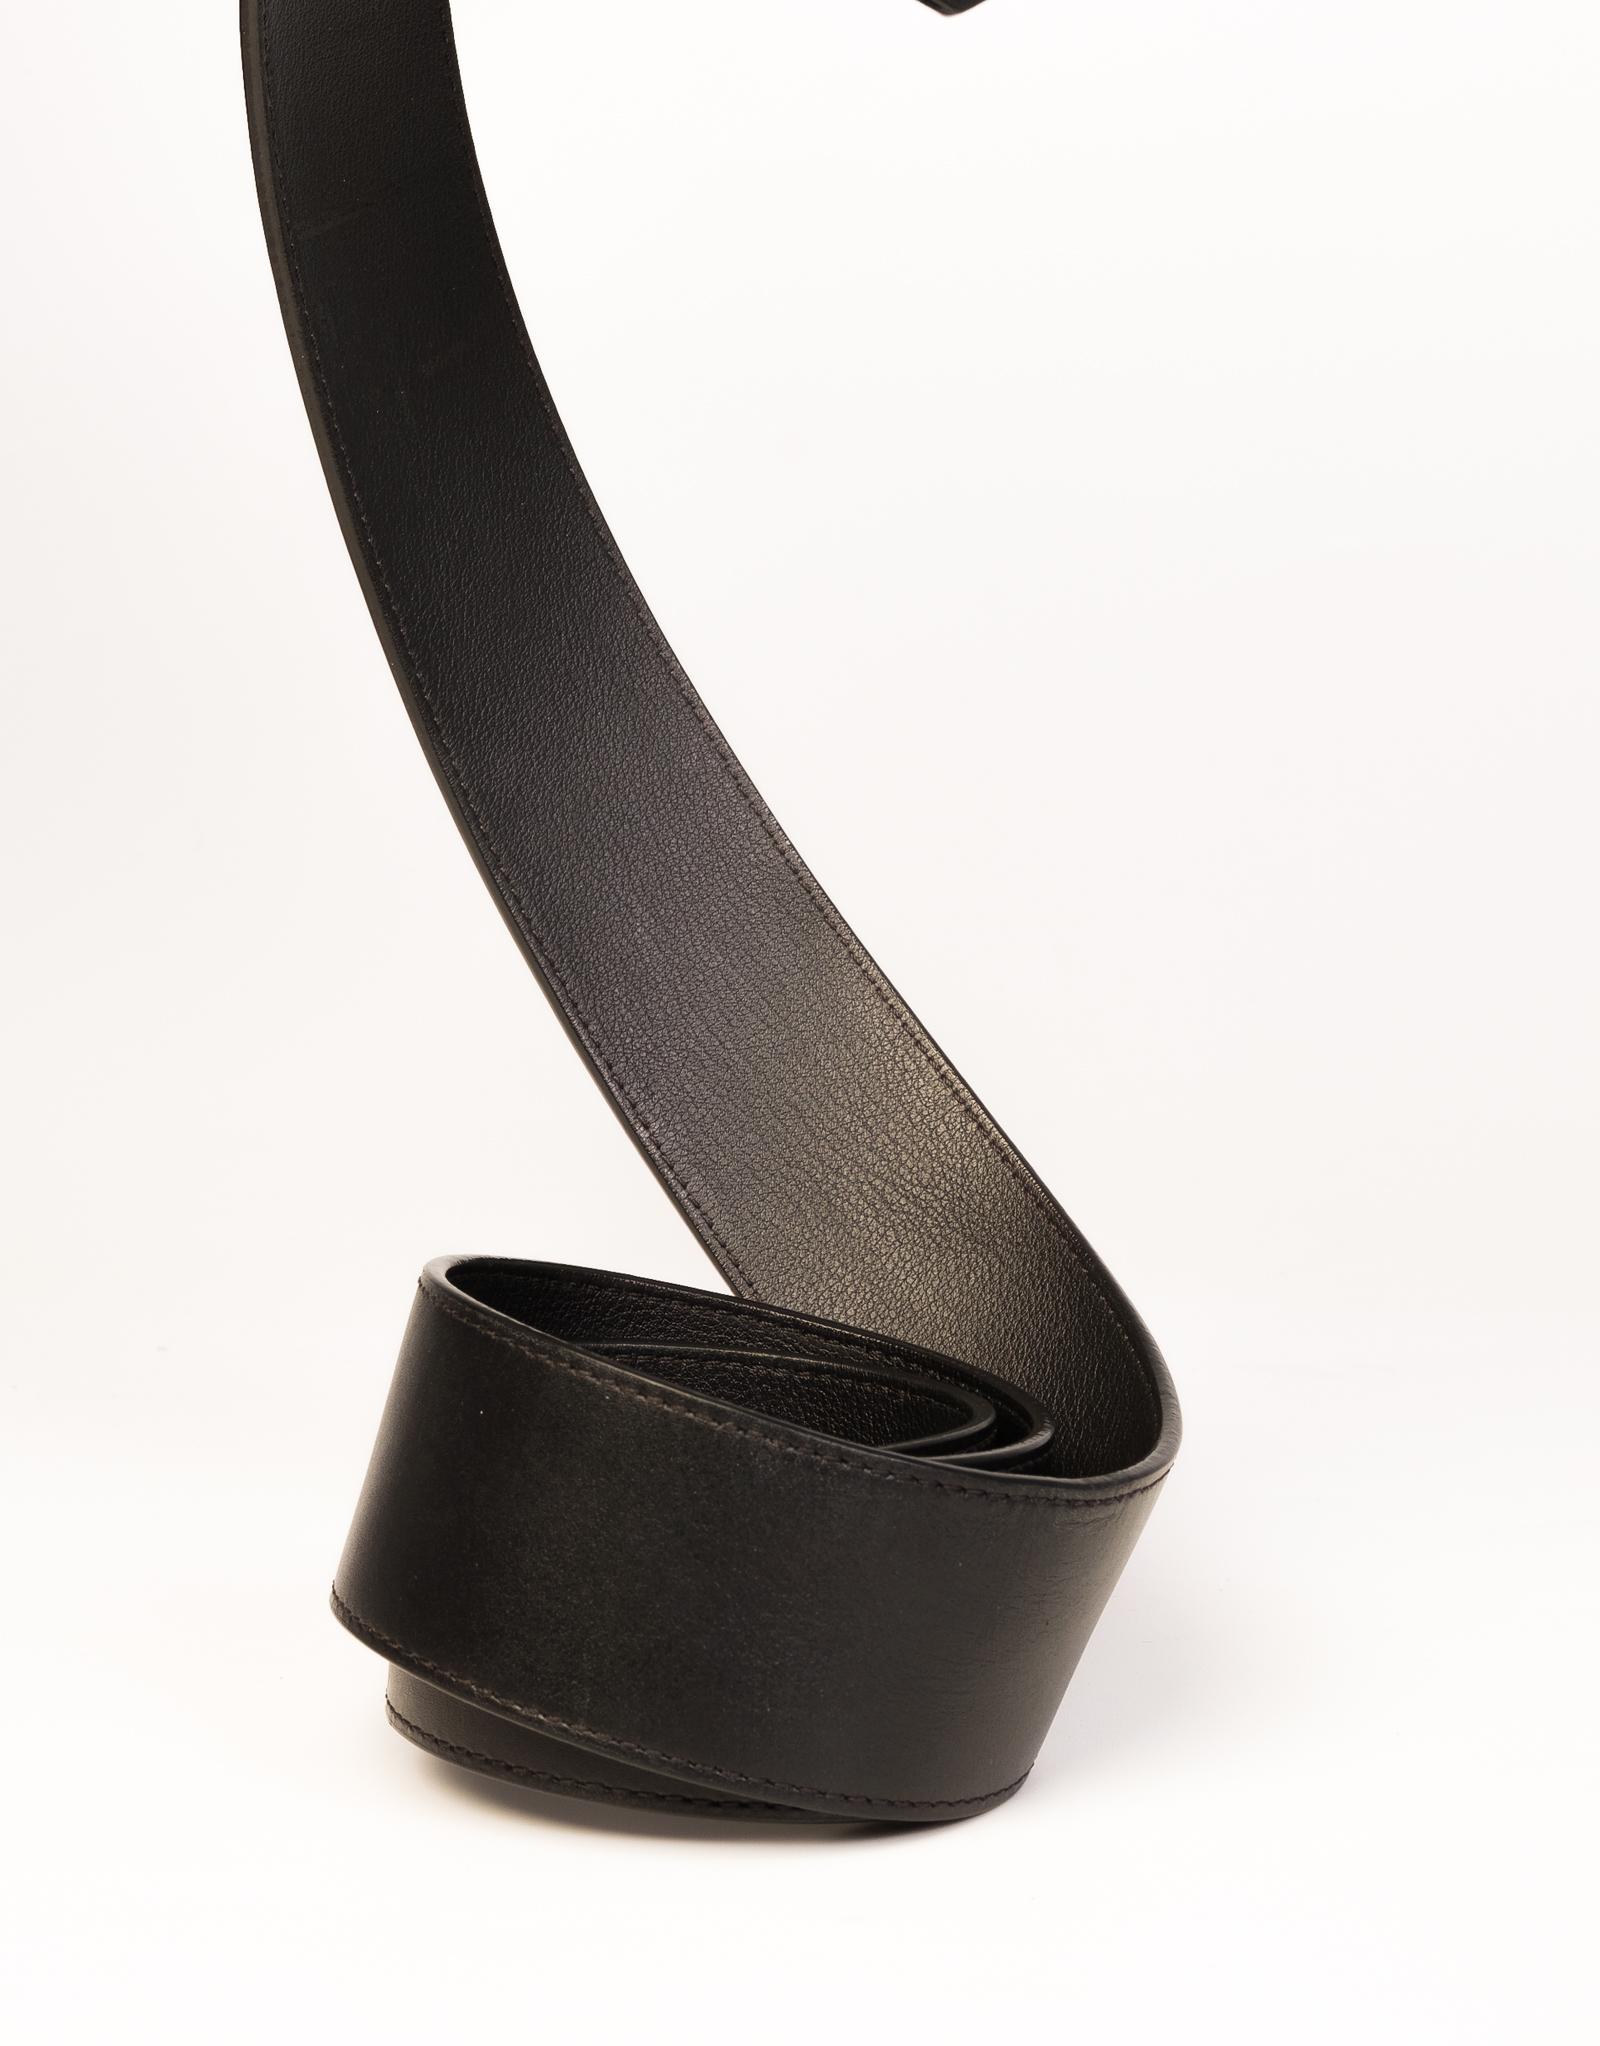 Black leather Louis Vuitton belt with integrated 